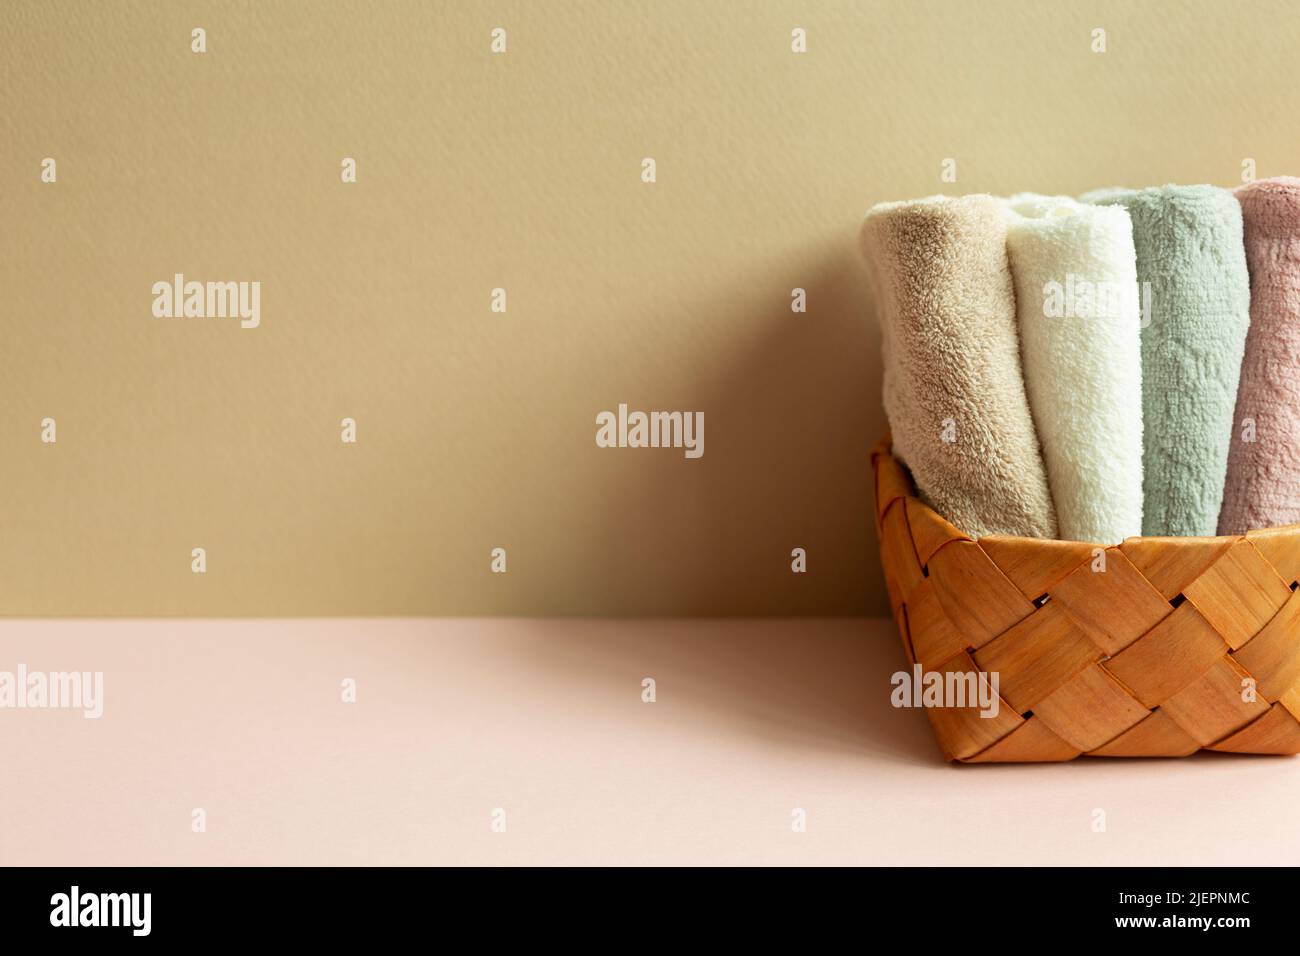 Towels in basket on pink table. beige wall background Stock Photo